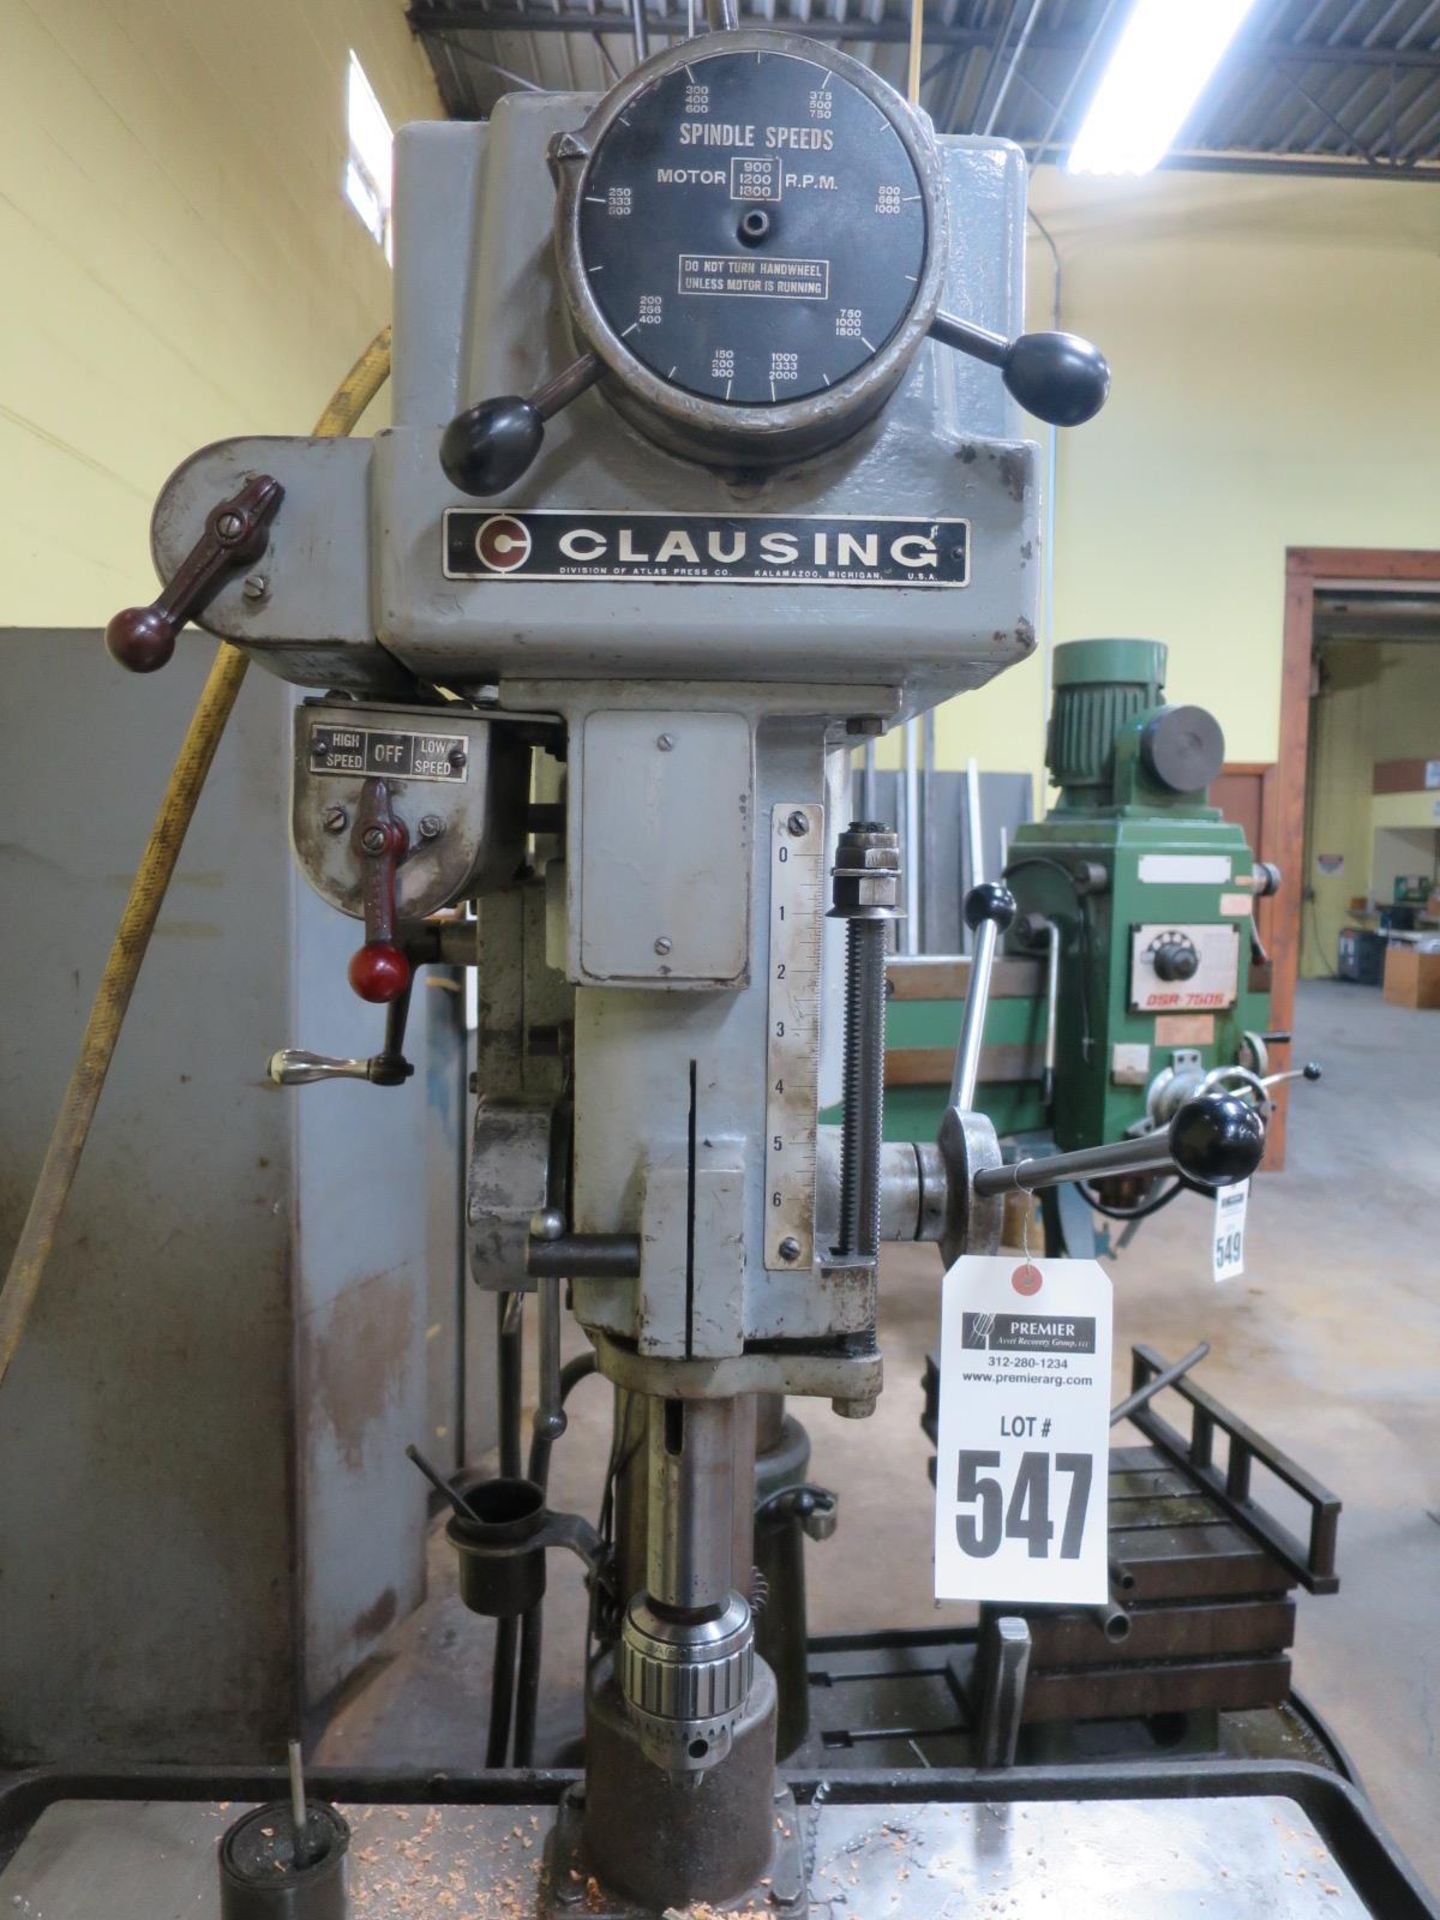 Clausing Series 22V 20" Variable Speed Drill Press, Sn 501841 With Jacobs Chuck and vice - Image 3 of 4